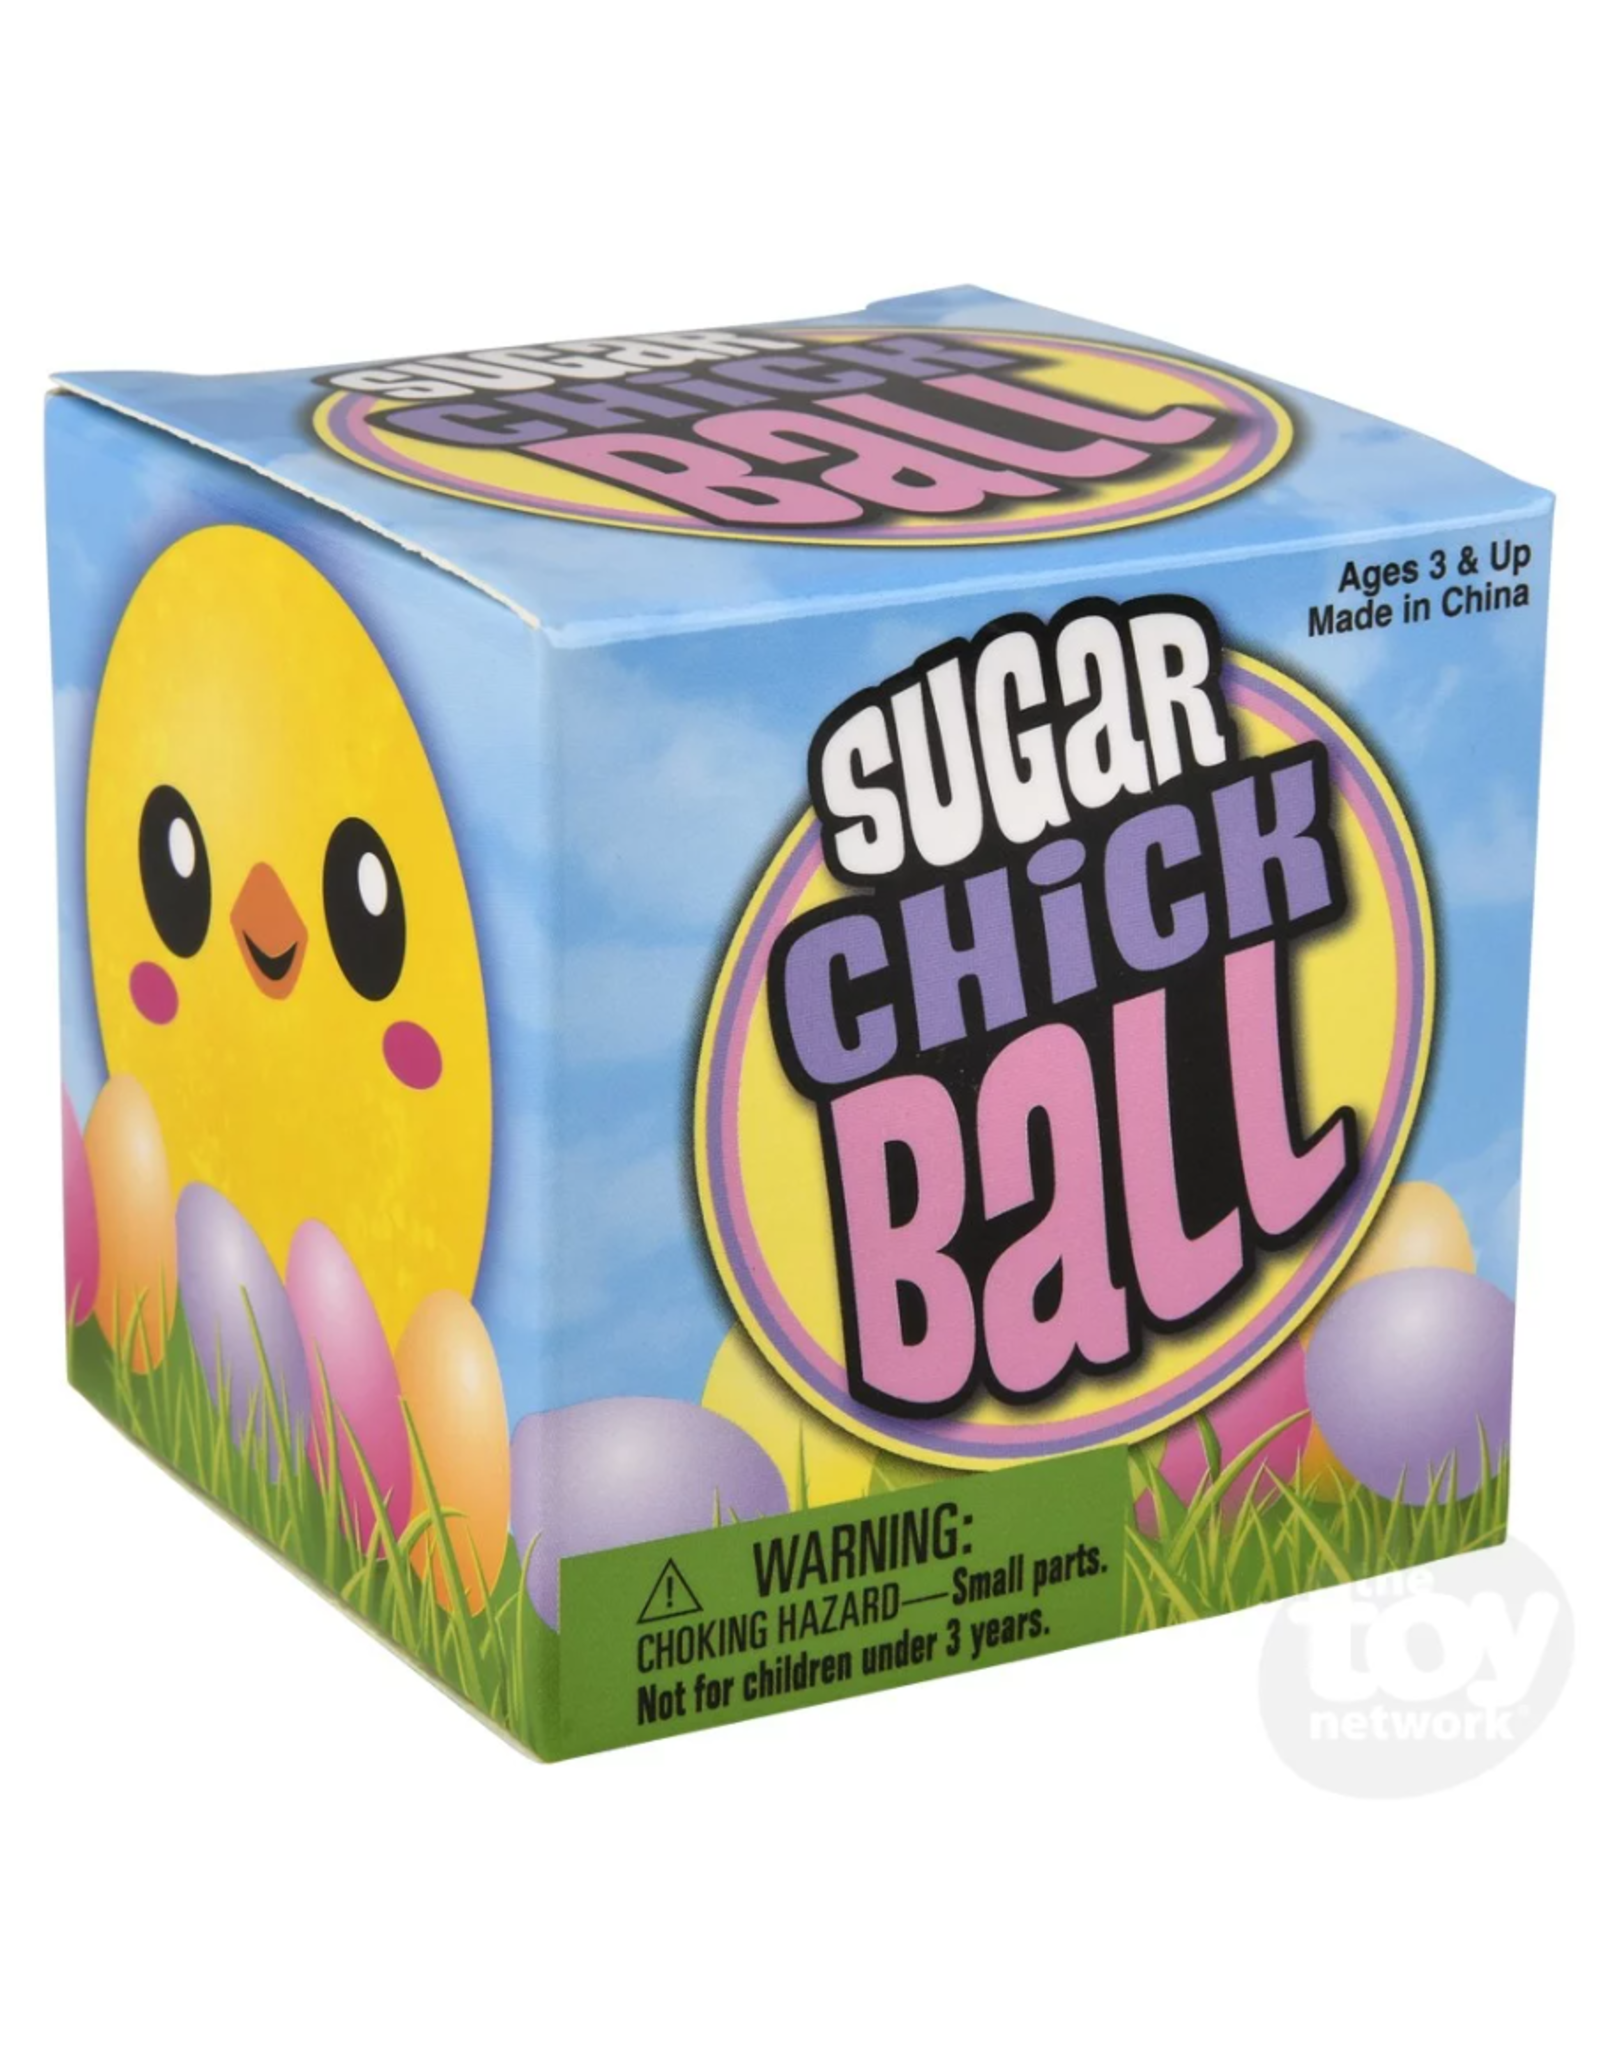 Squeezy Sugar Chick Ball